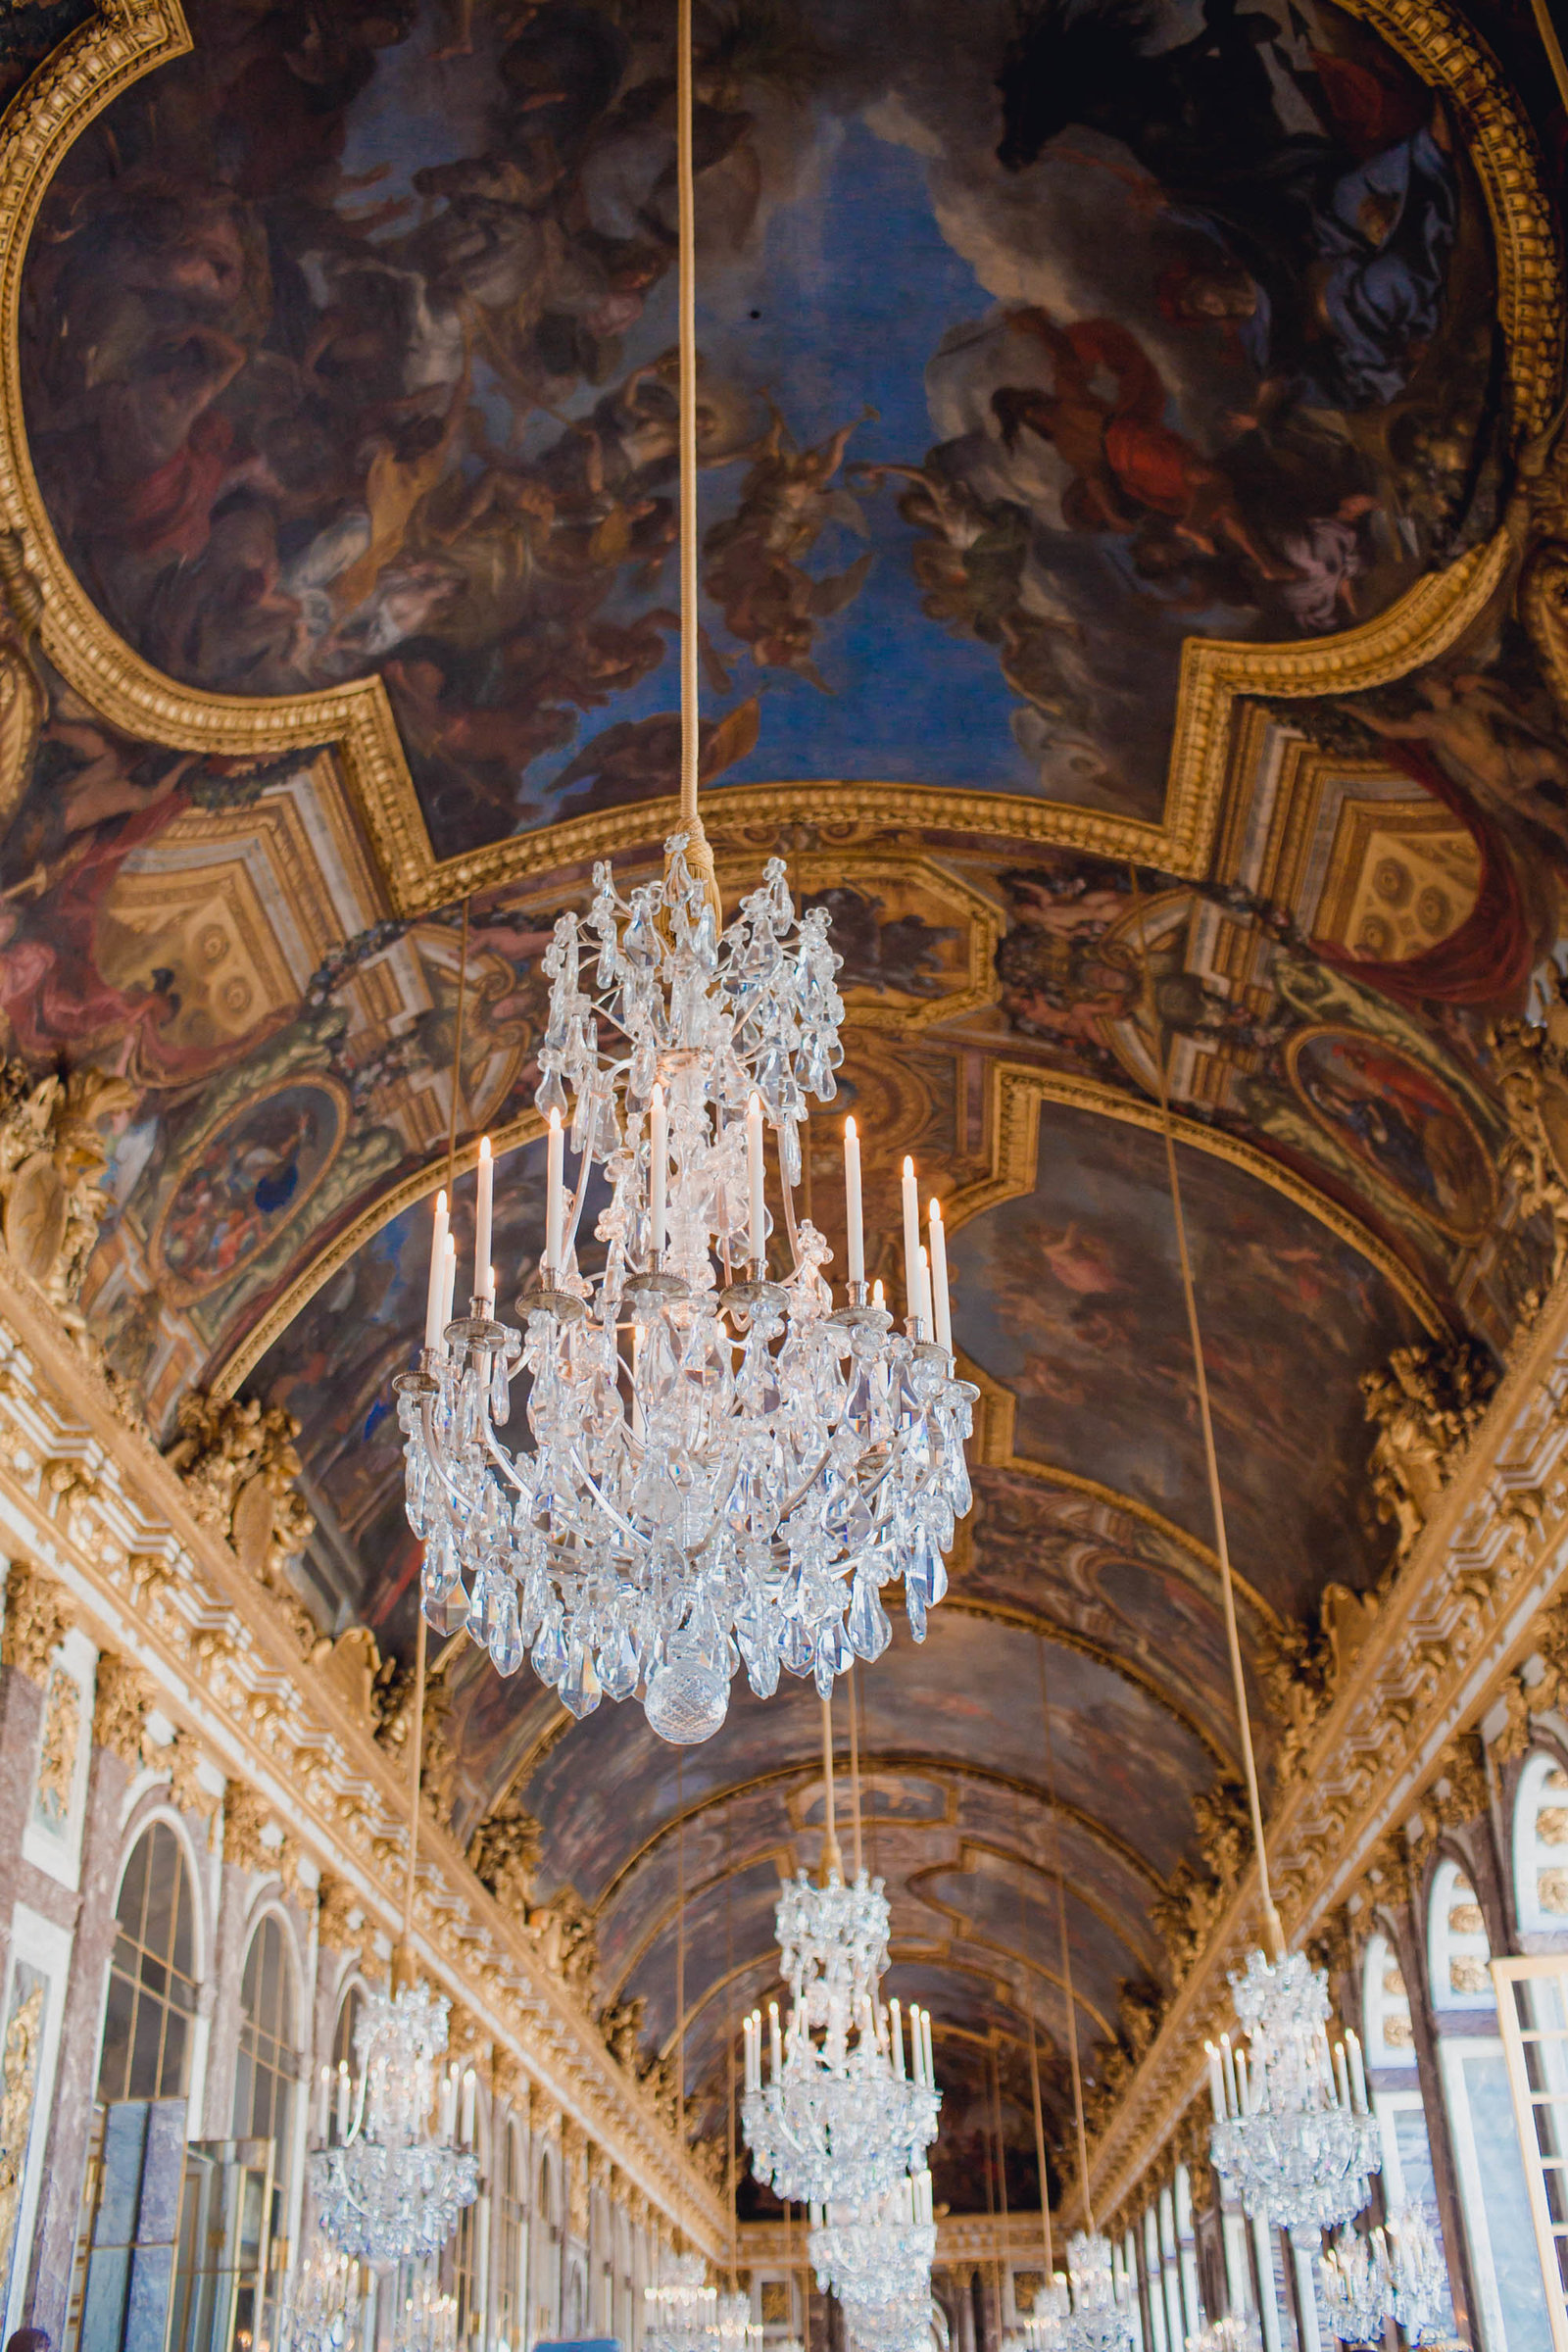 hall-mirrors-chandelier-palace-versailles-france-travel-destination-kate-timbers-photography-1656